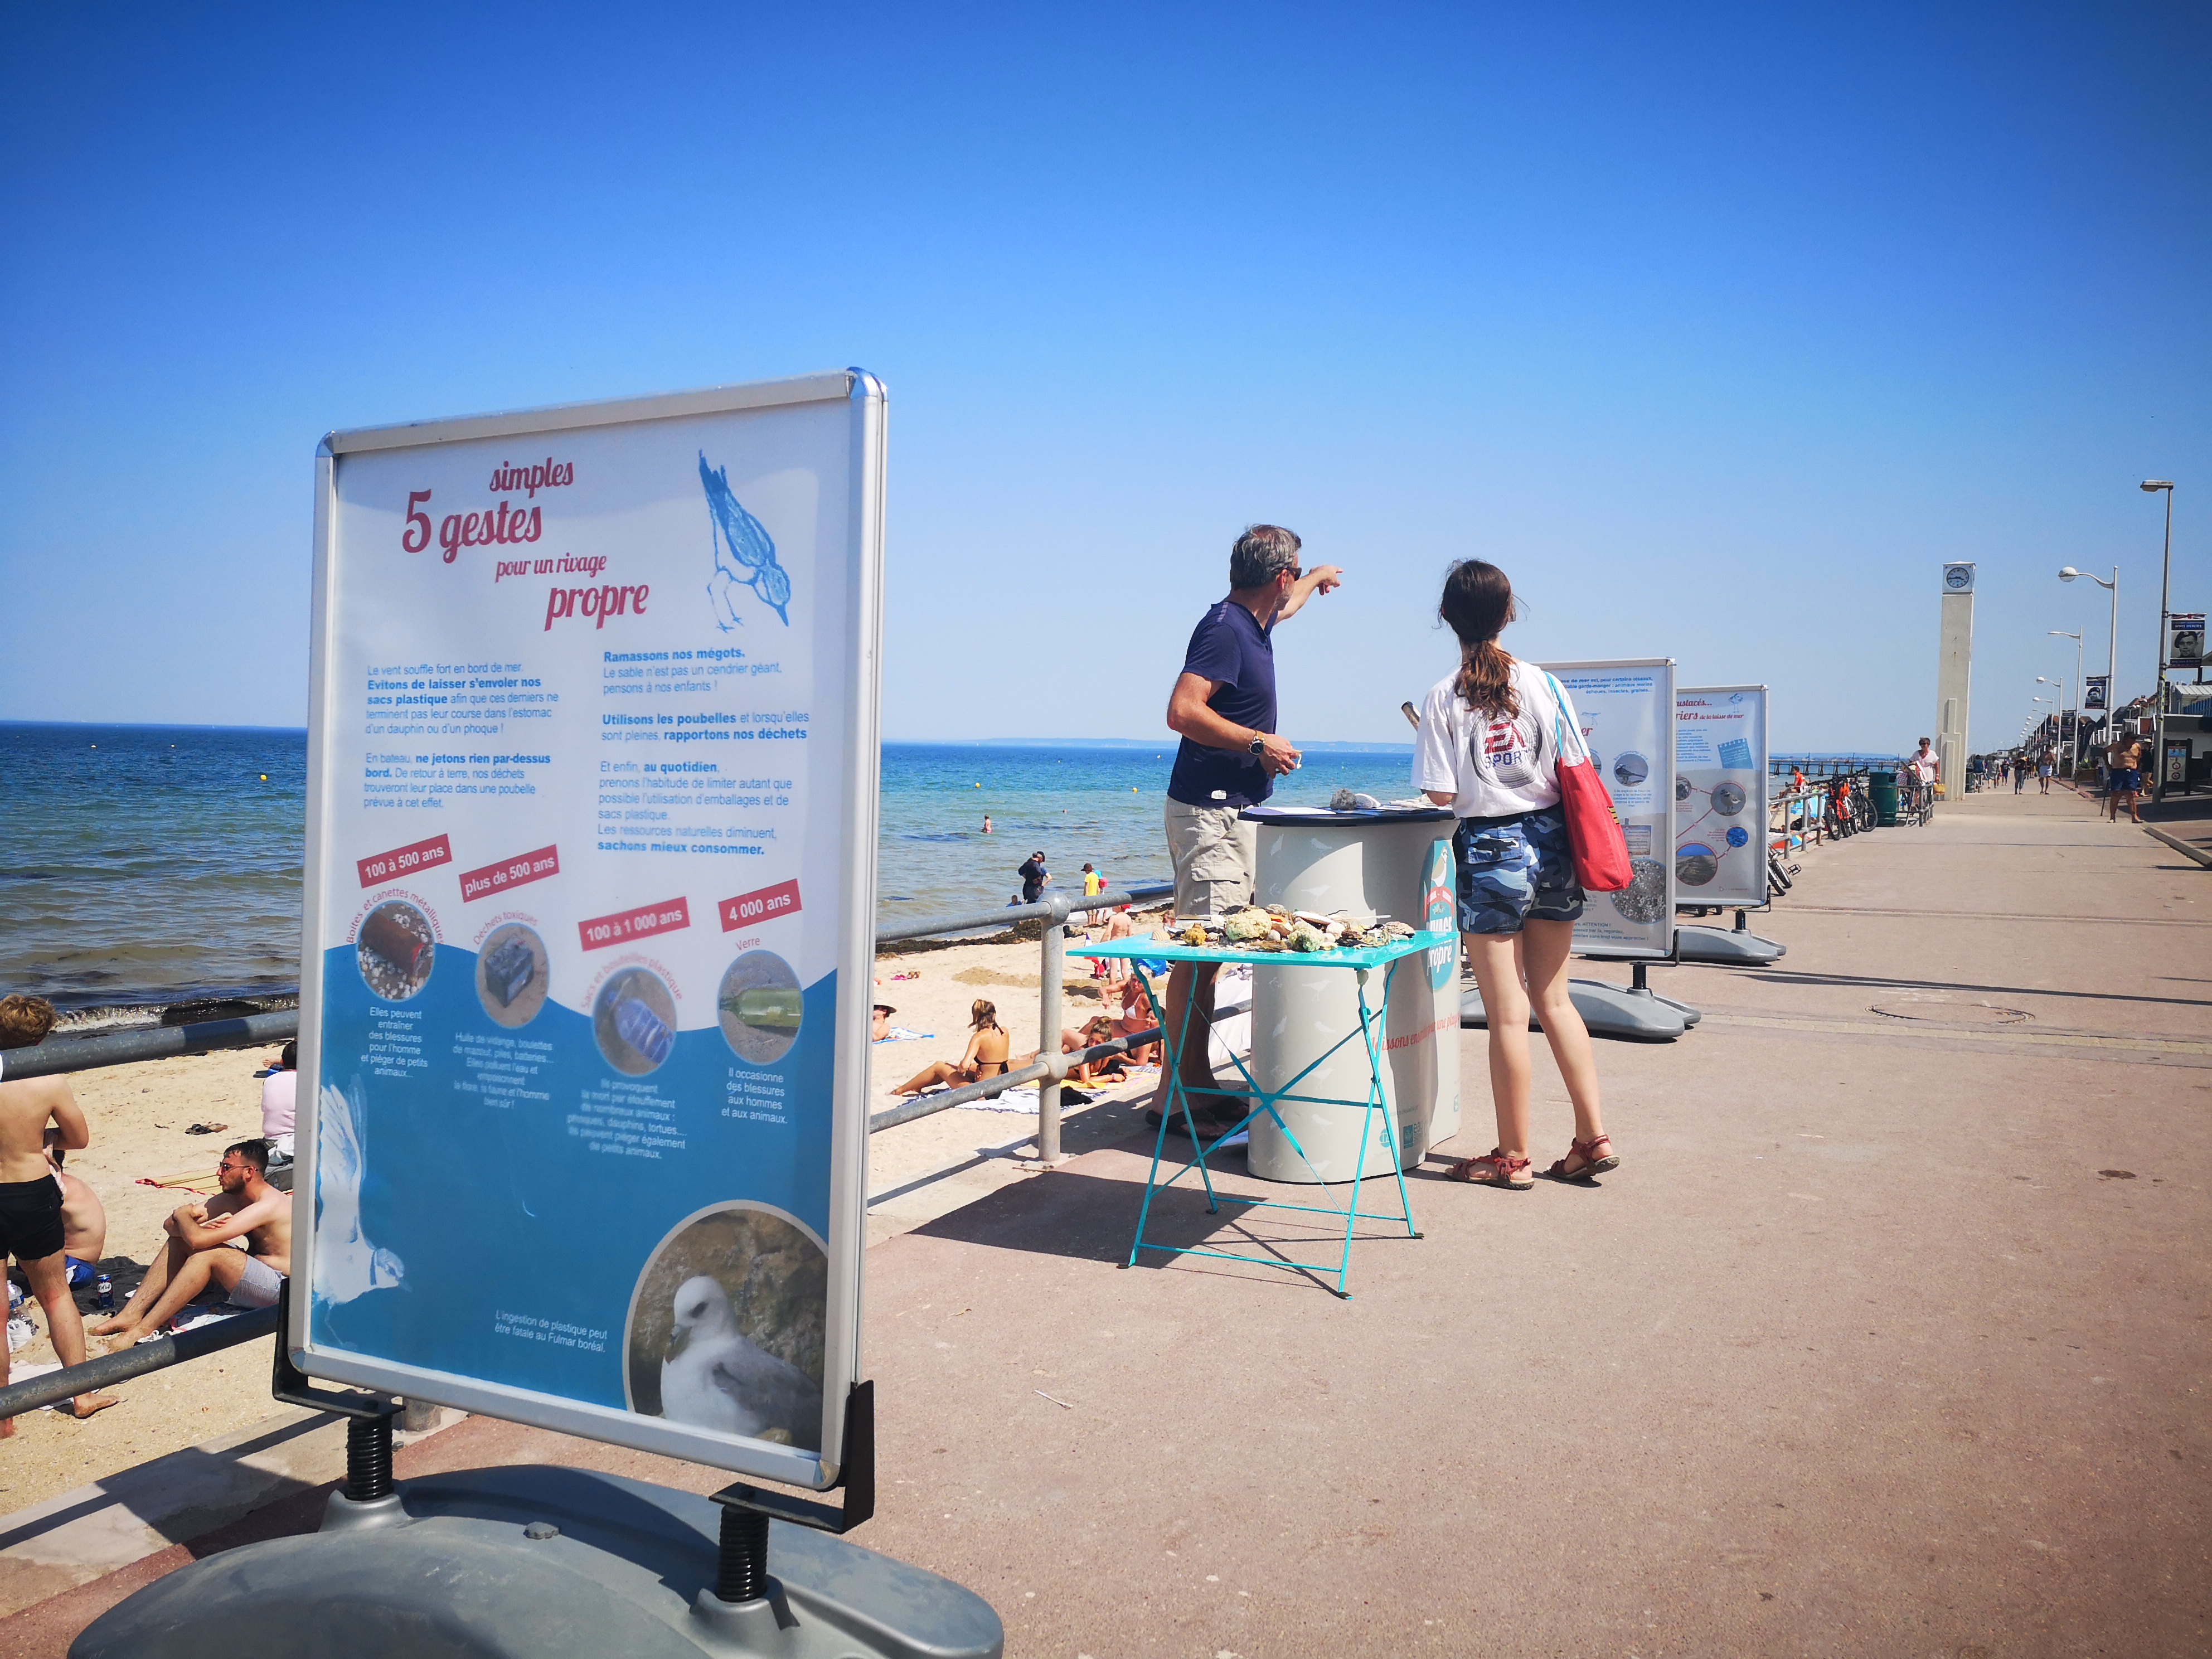 STAND-RIVAGE-PROPRE-LUC-SUR-MER-CREDIT-NATHALIE-PAPOUIN